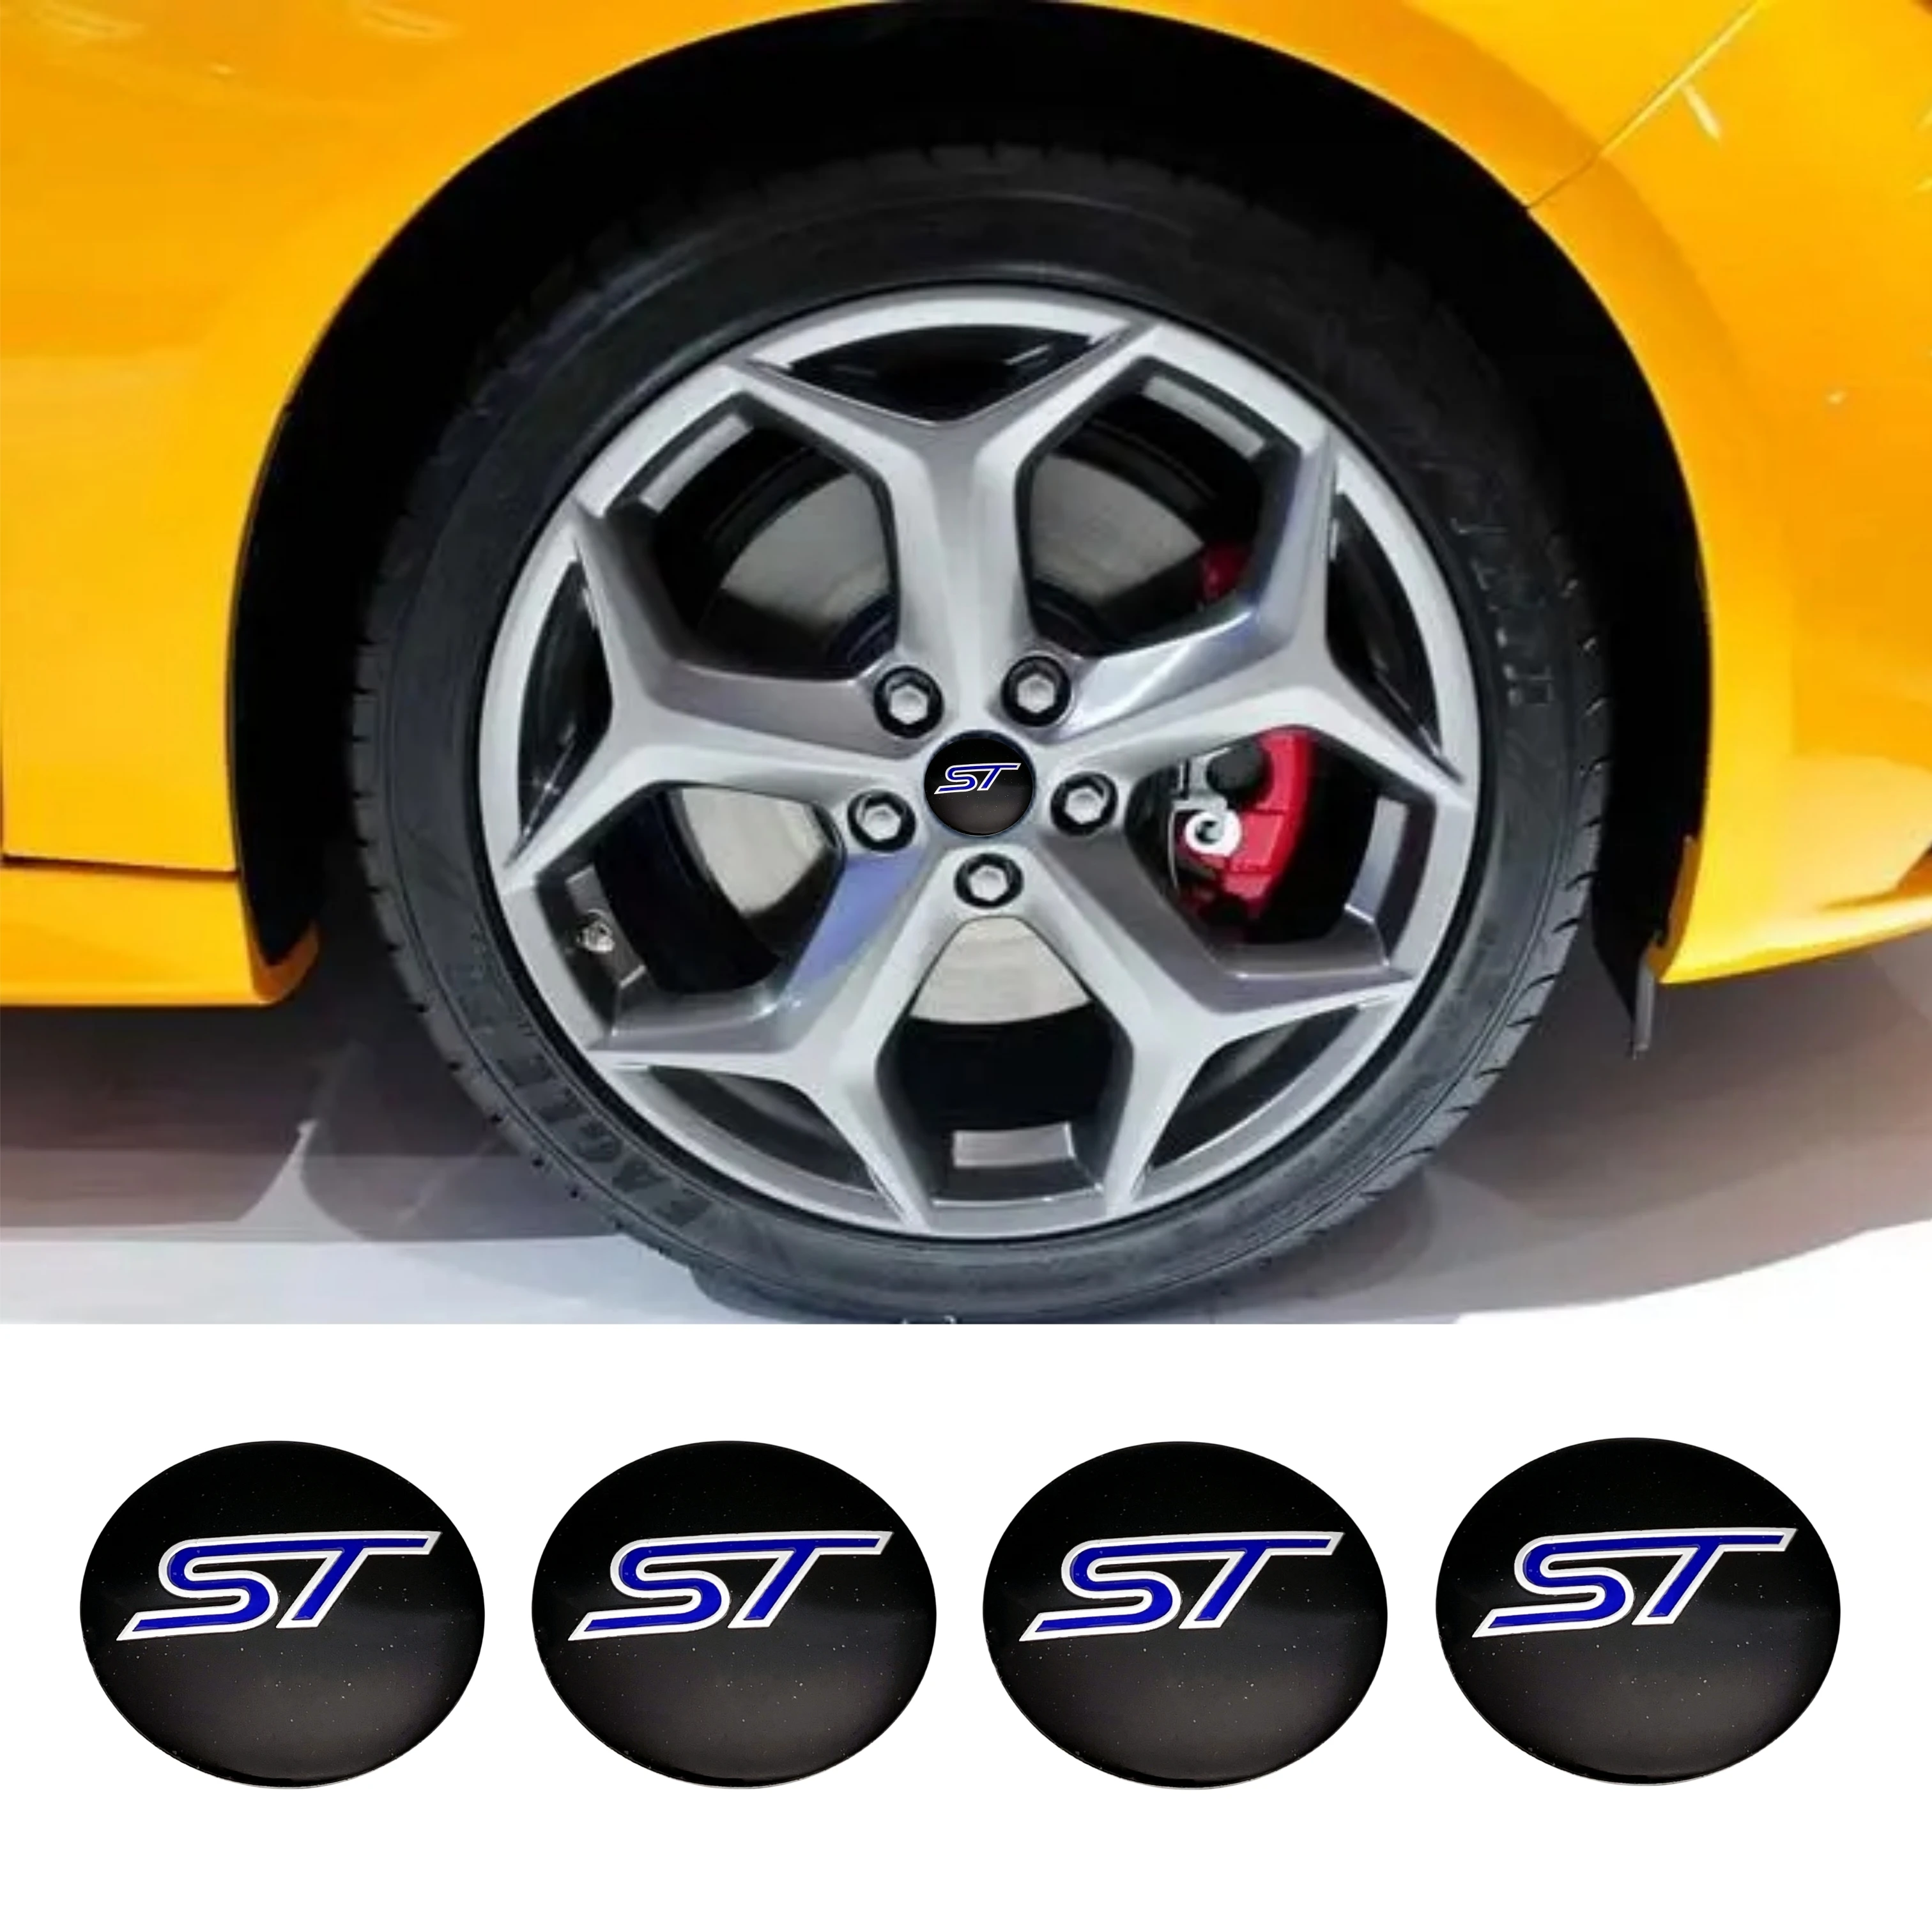 

56mm 60mm Metal ST Emblem Logo Car Stickers Wheel Hub Center Cover Rim Cap Badge For Badge Styling Accessories For Mondeo Focus